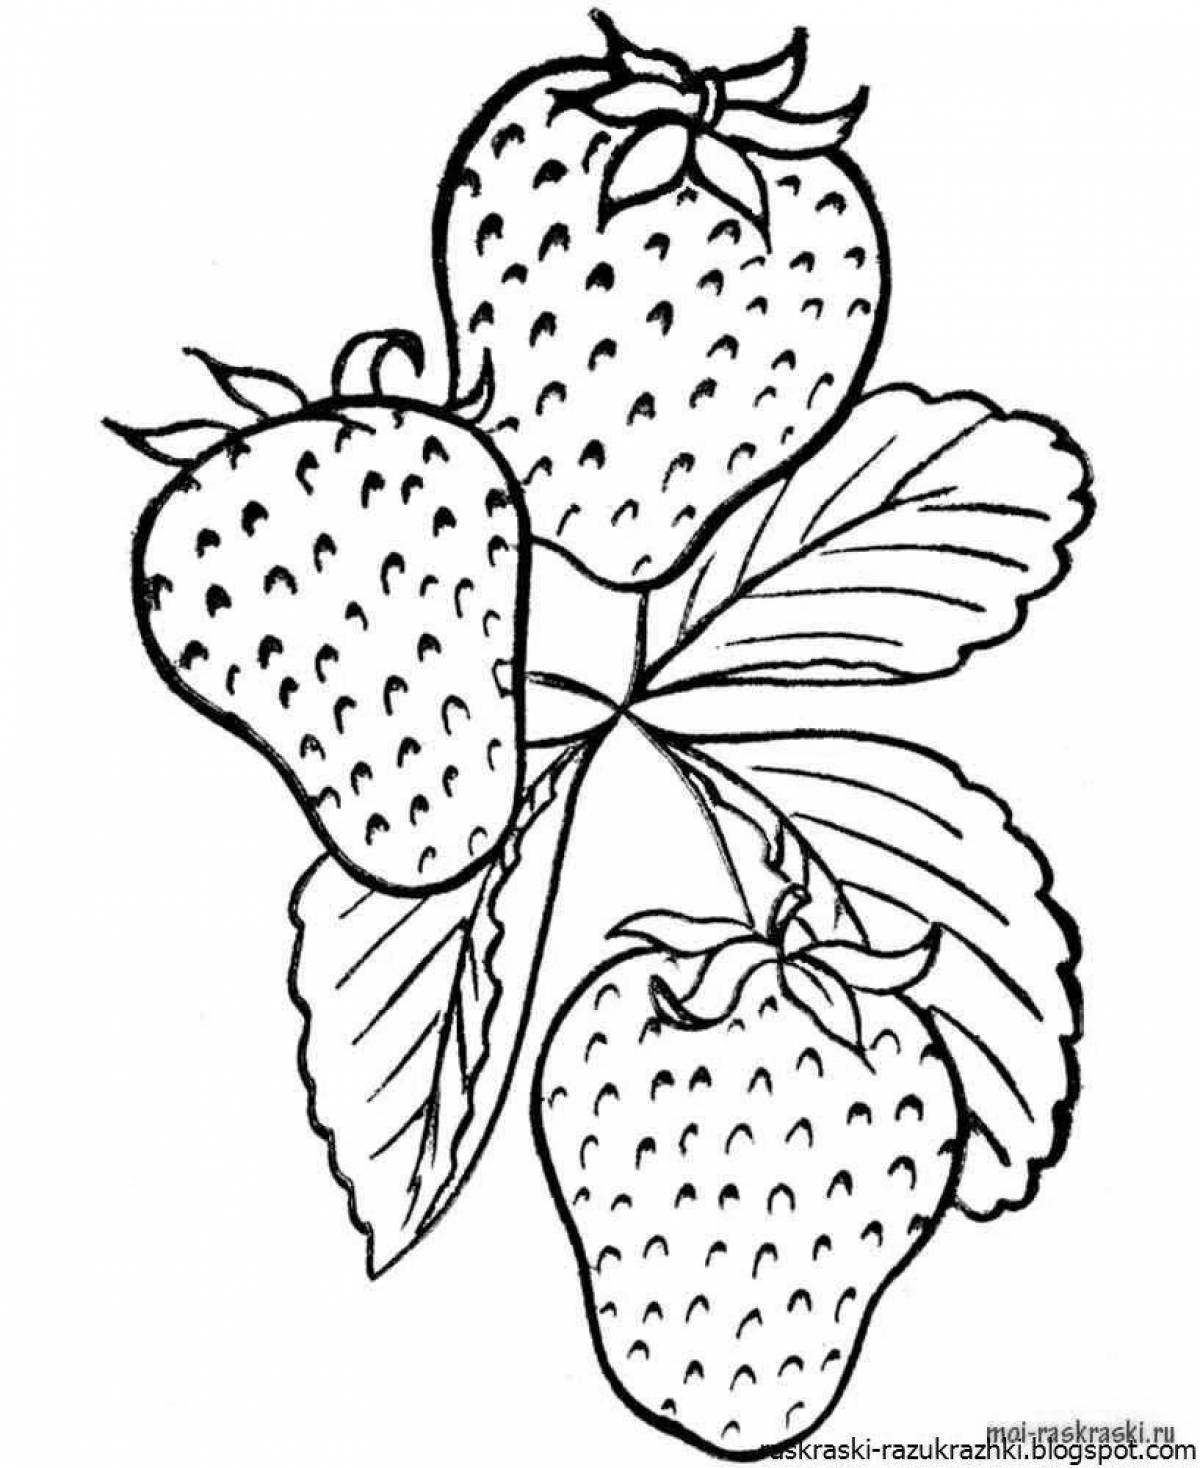 Colorful fruit and berry coloring book for girls